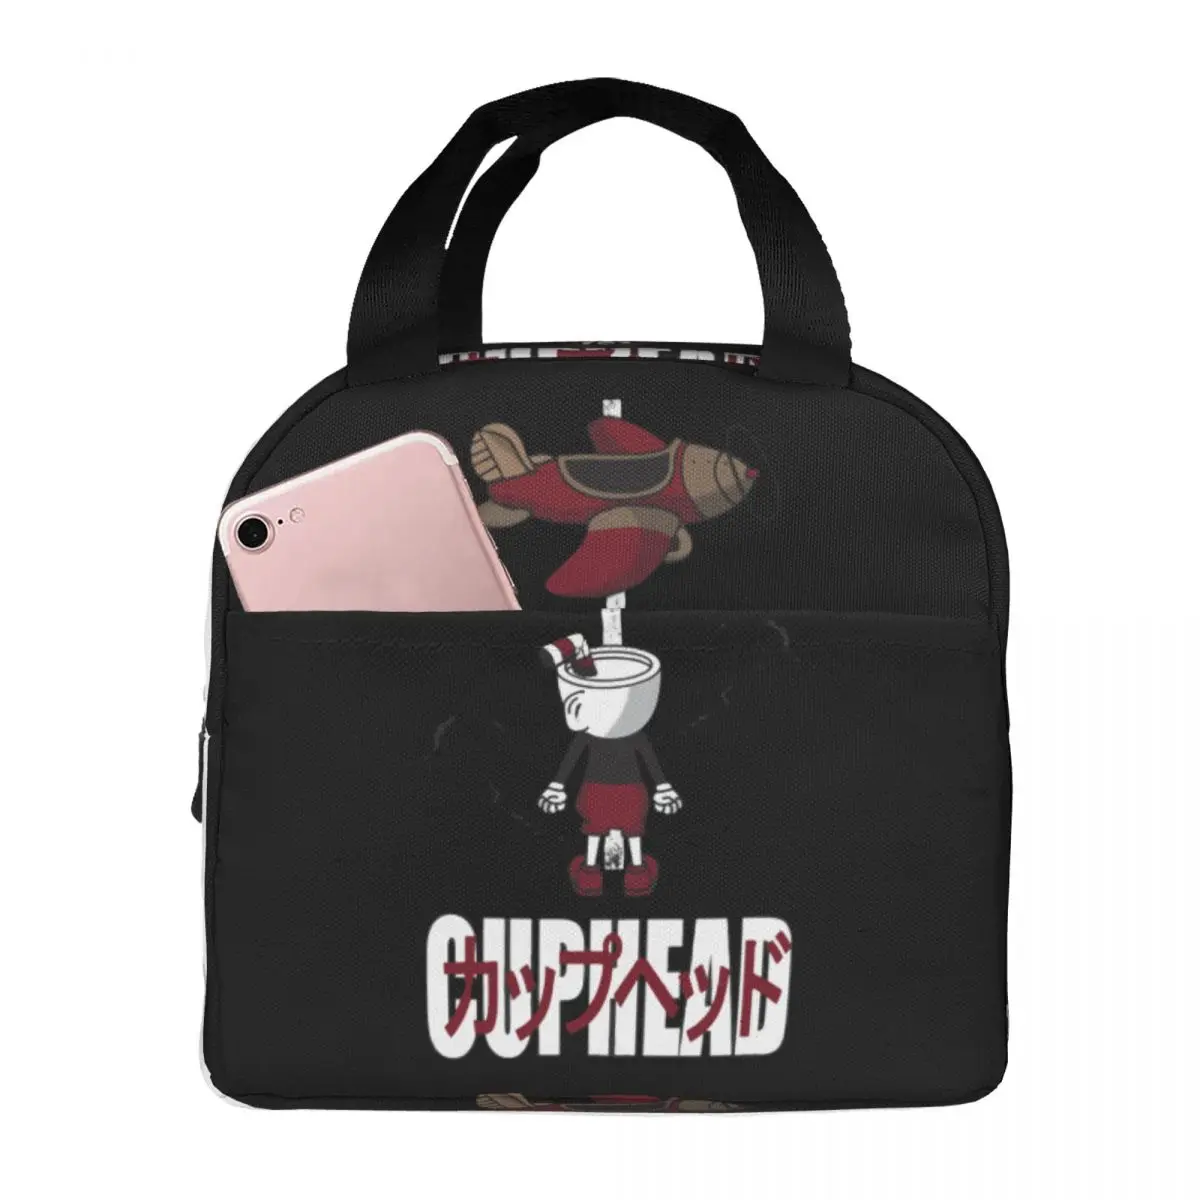 Lunch Bags for Women Kids Cuphead Thermal Cooler Portable Picnic Work Oxford Tote Handbags